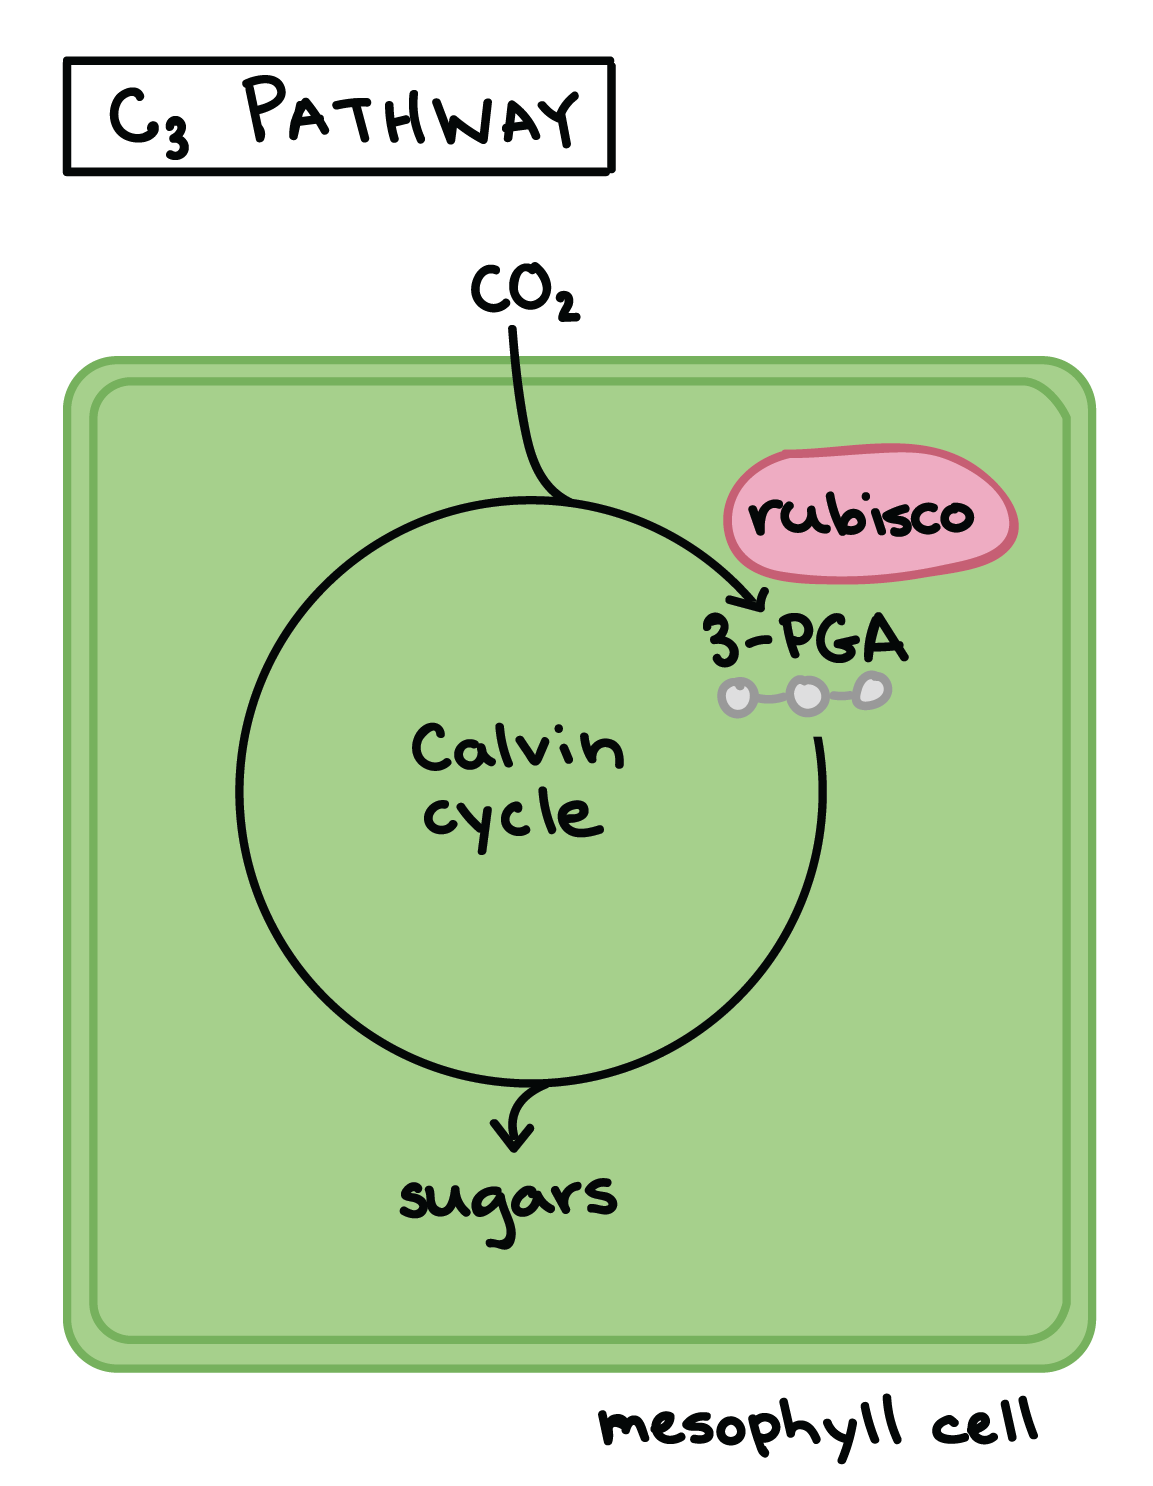 Image of the c3 pathway. Carbon dioxide enters a mesophyll cell and is fixed immediately by rubisco, leading to the formation of three PGA molecules, which contain three carbons.